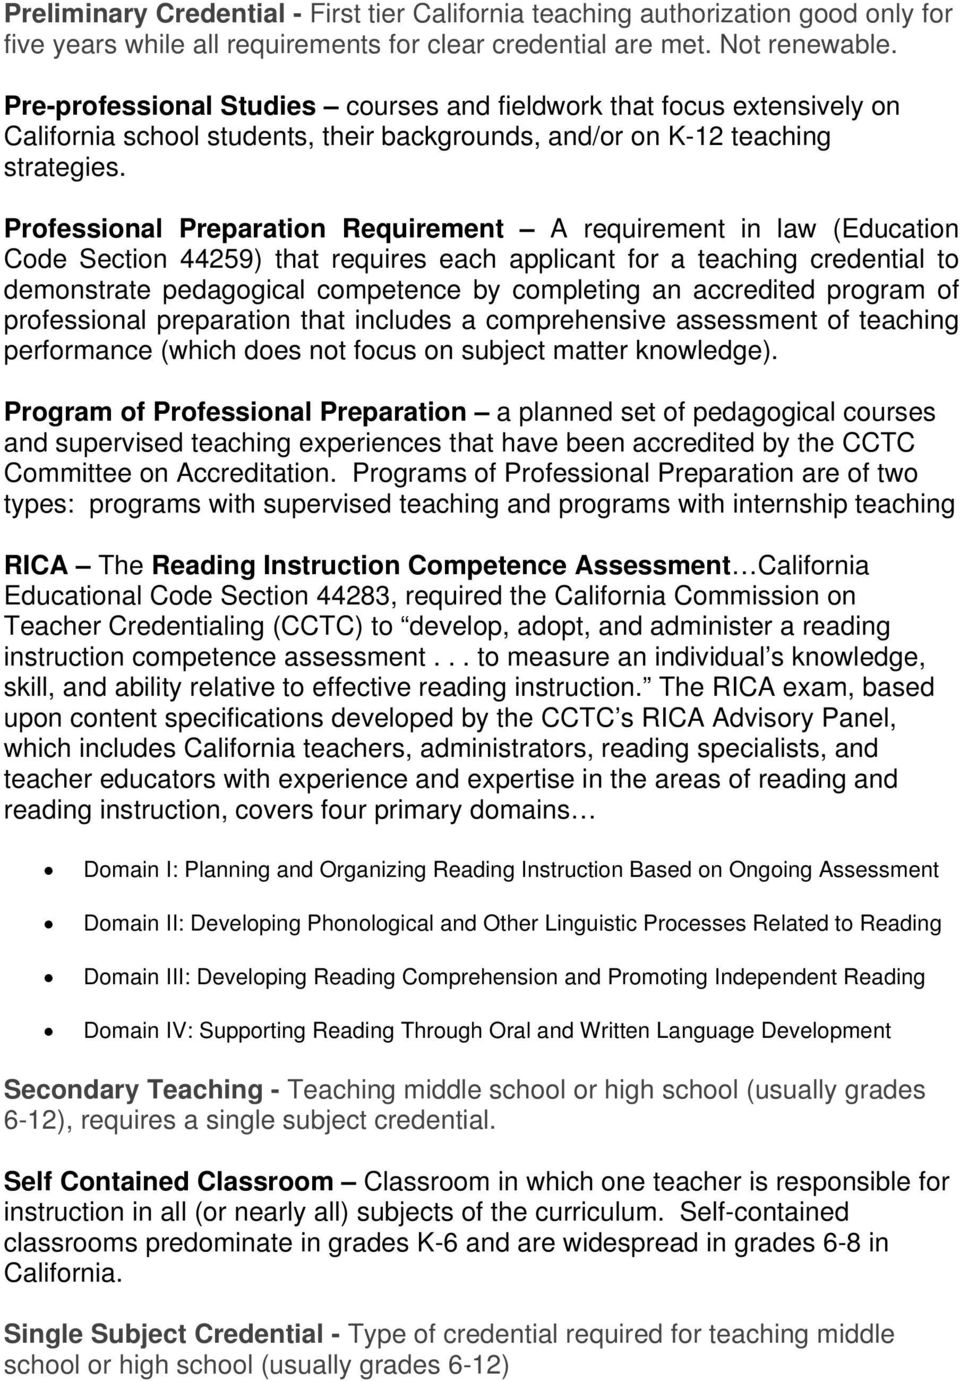 Professional Preparation Requirement A requirement in law (Education Code Section 44259) that requires each applicant for a teaching credential to demonstrate pedagogical competence by completing an